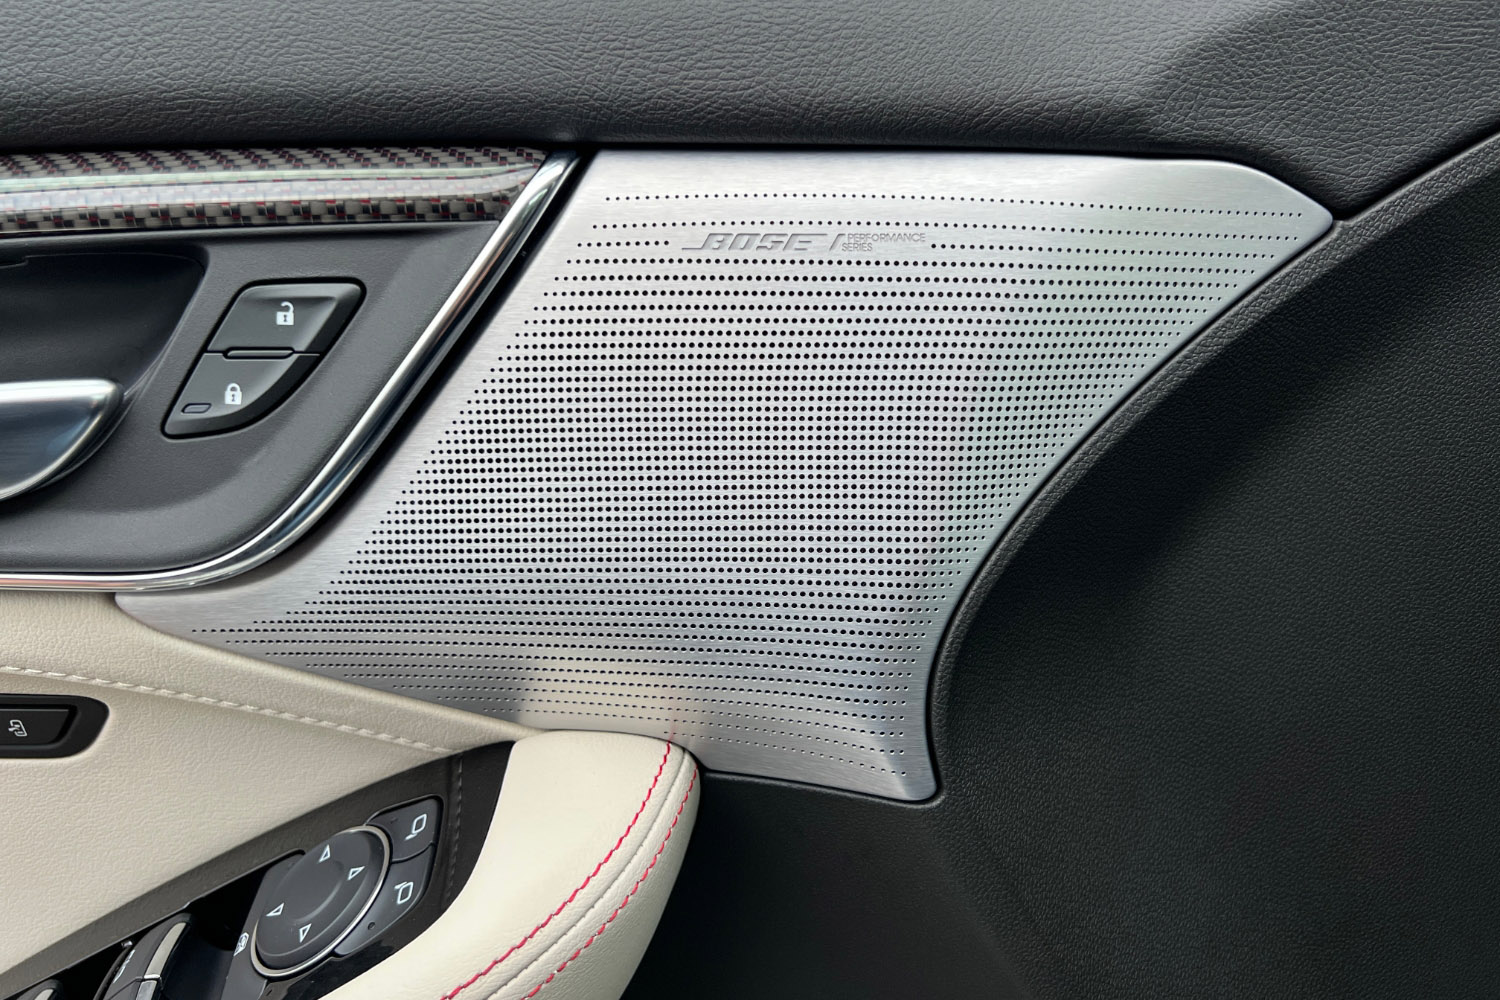 Detail shot of a metal Bose speaker grille on the door panel of a 2023 Cadillac CT5-V